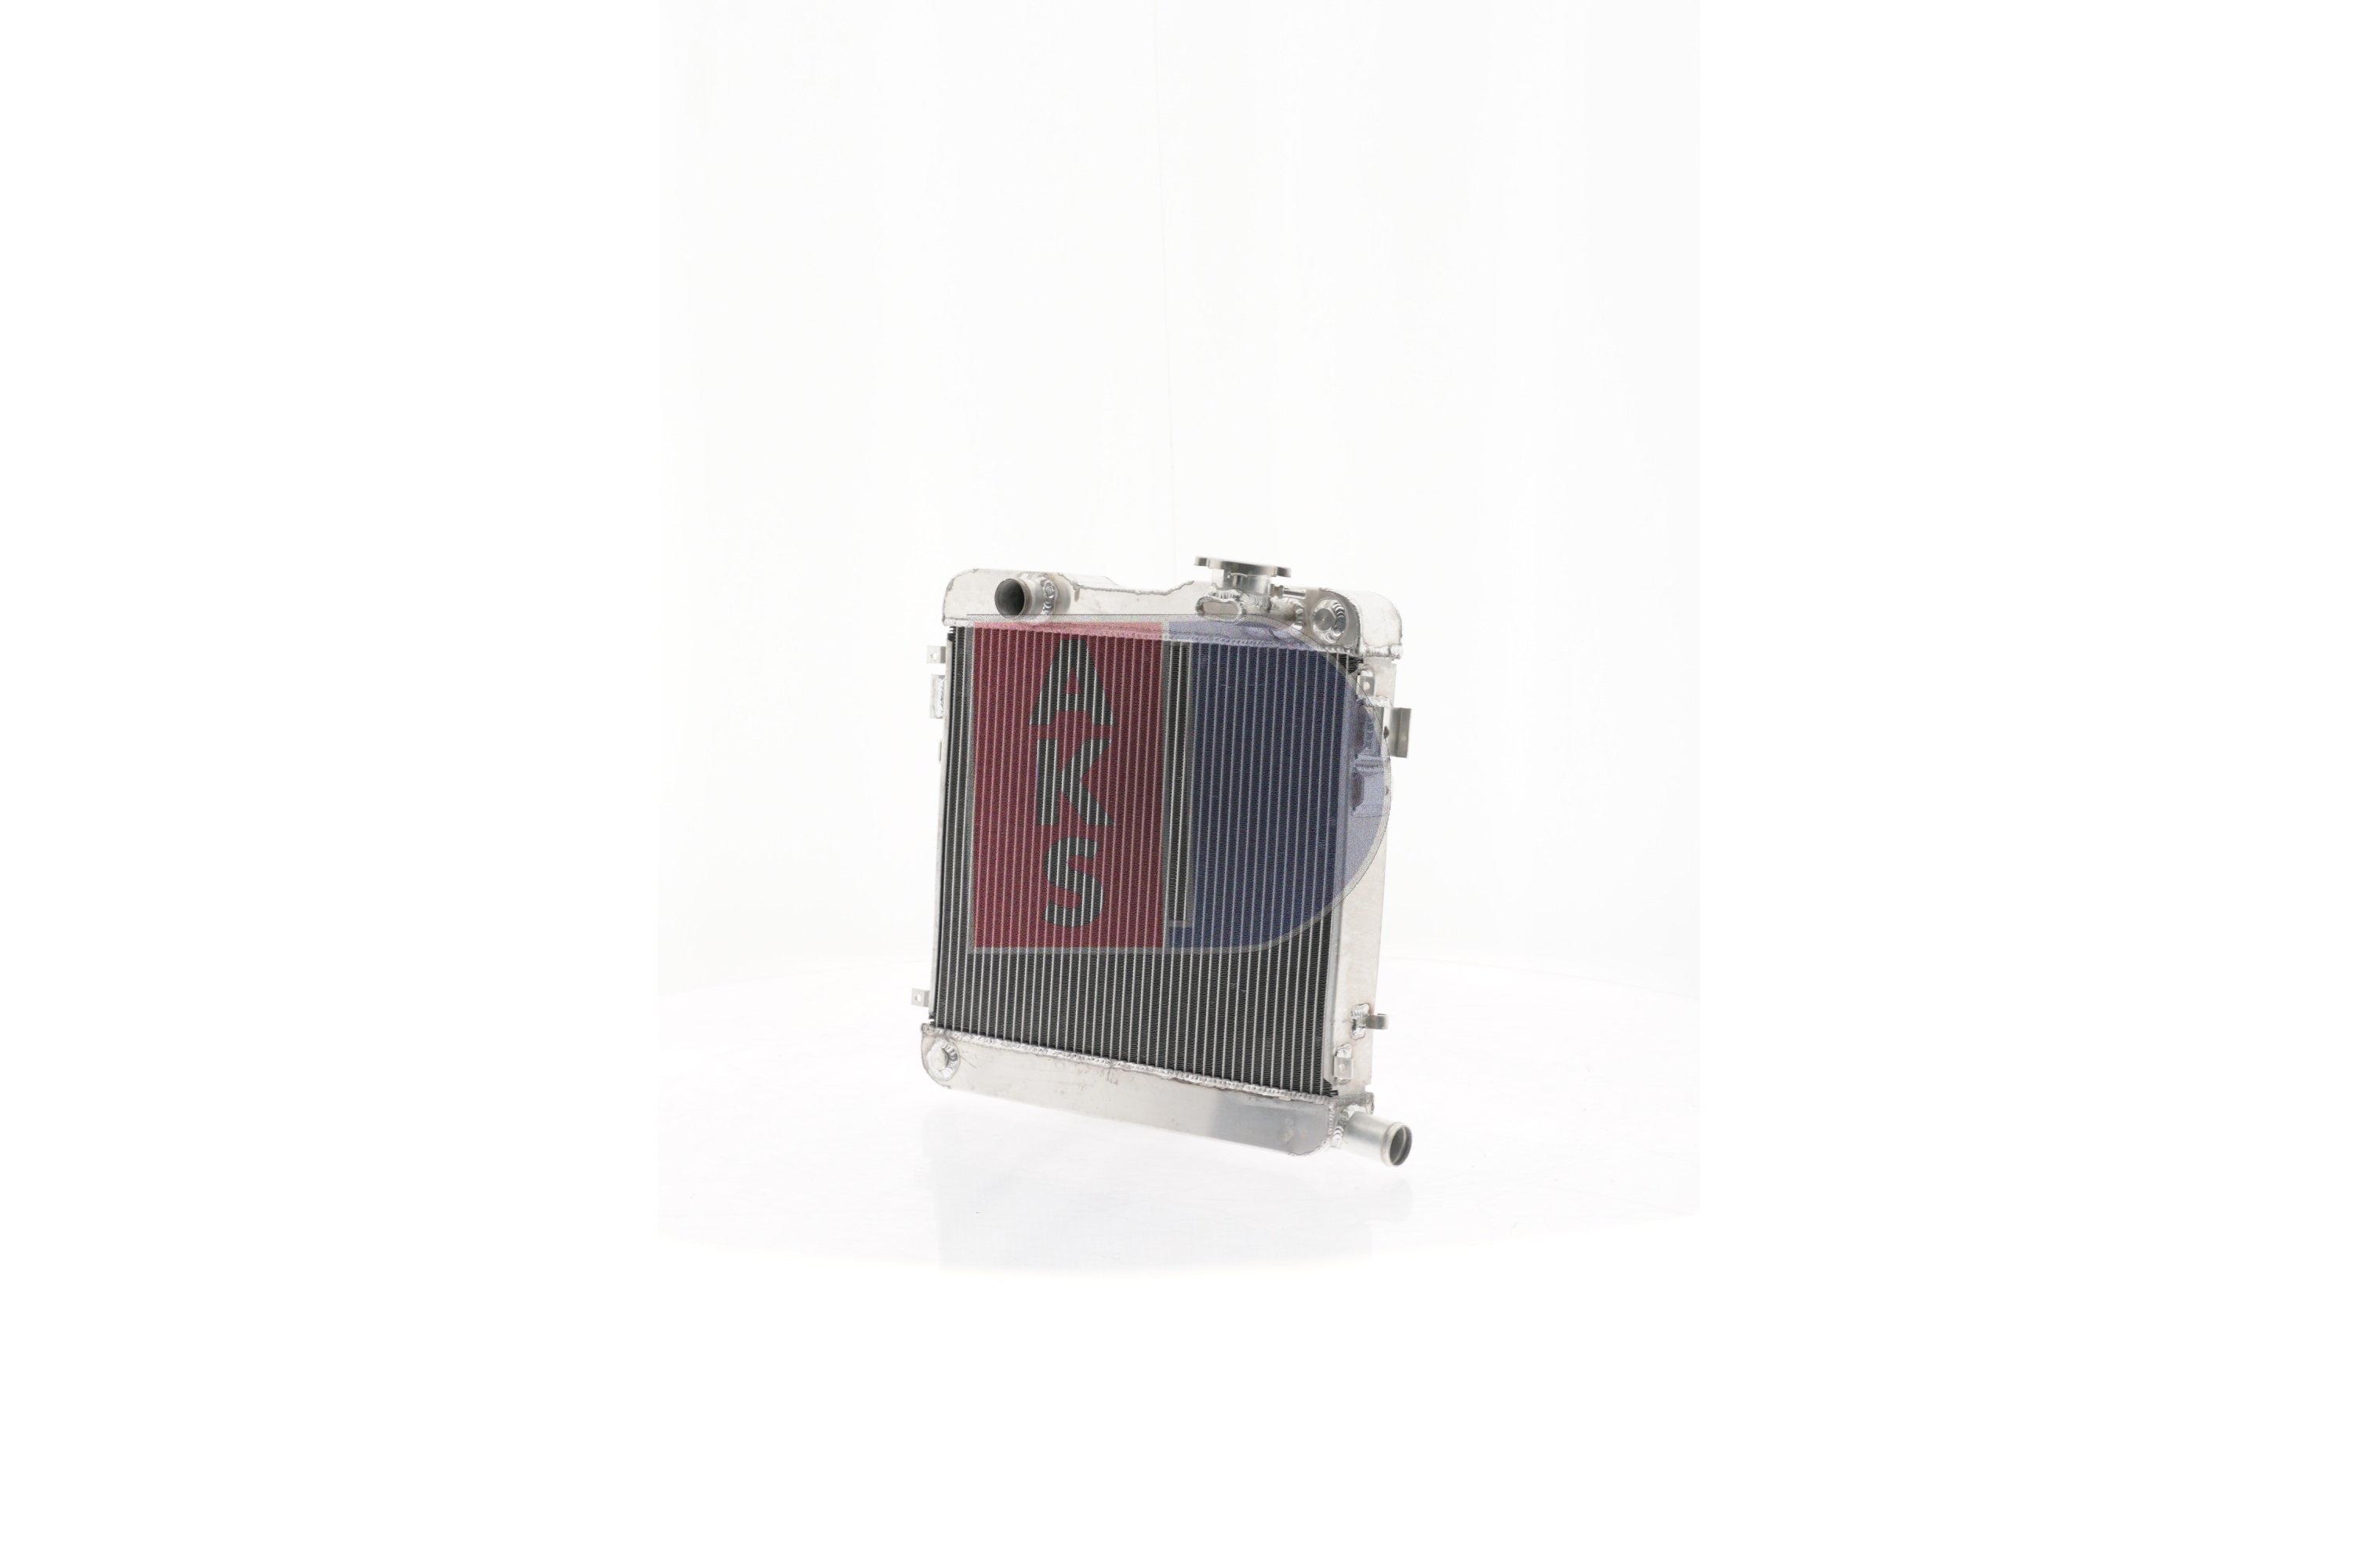 AKS DASIS 150030AL Engine radiator Aluminium, 350 x 450 x 42 mm, with threaded connection for temperature sensor, Manual Transmission, Brazed cooling fins